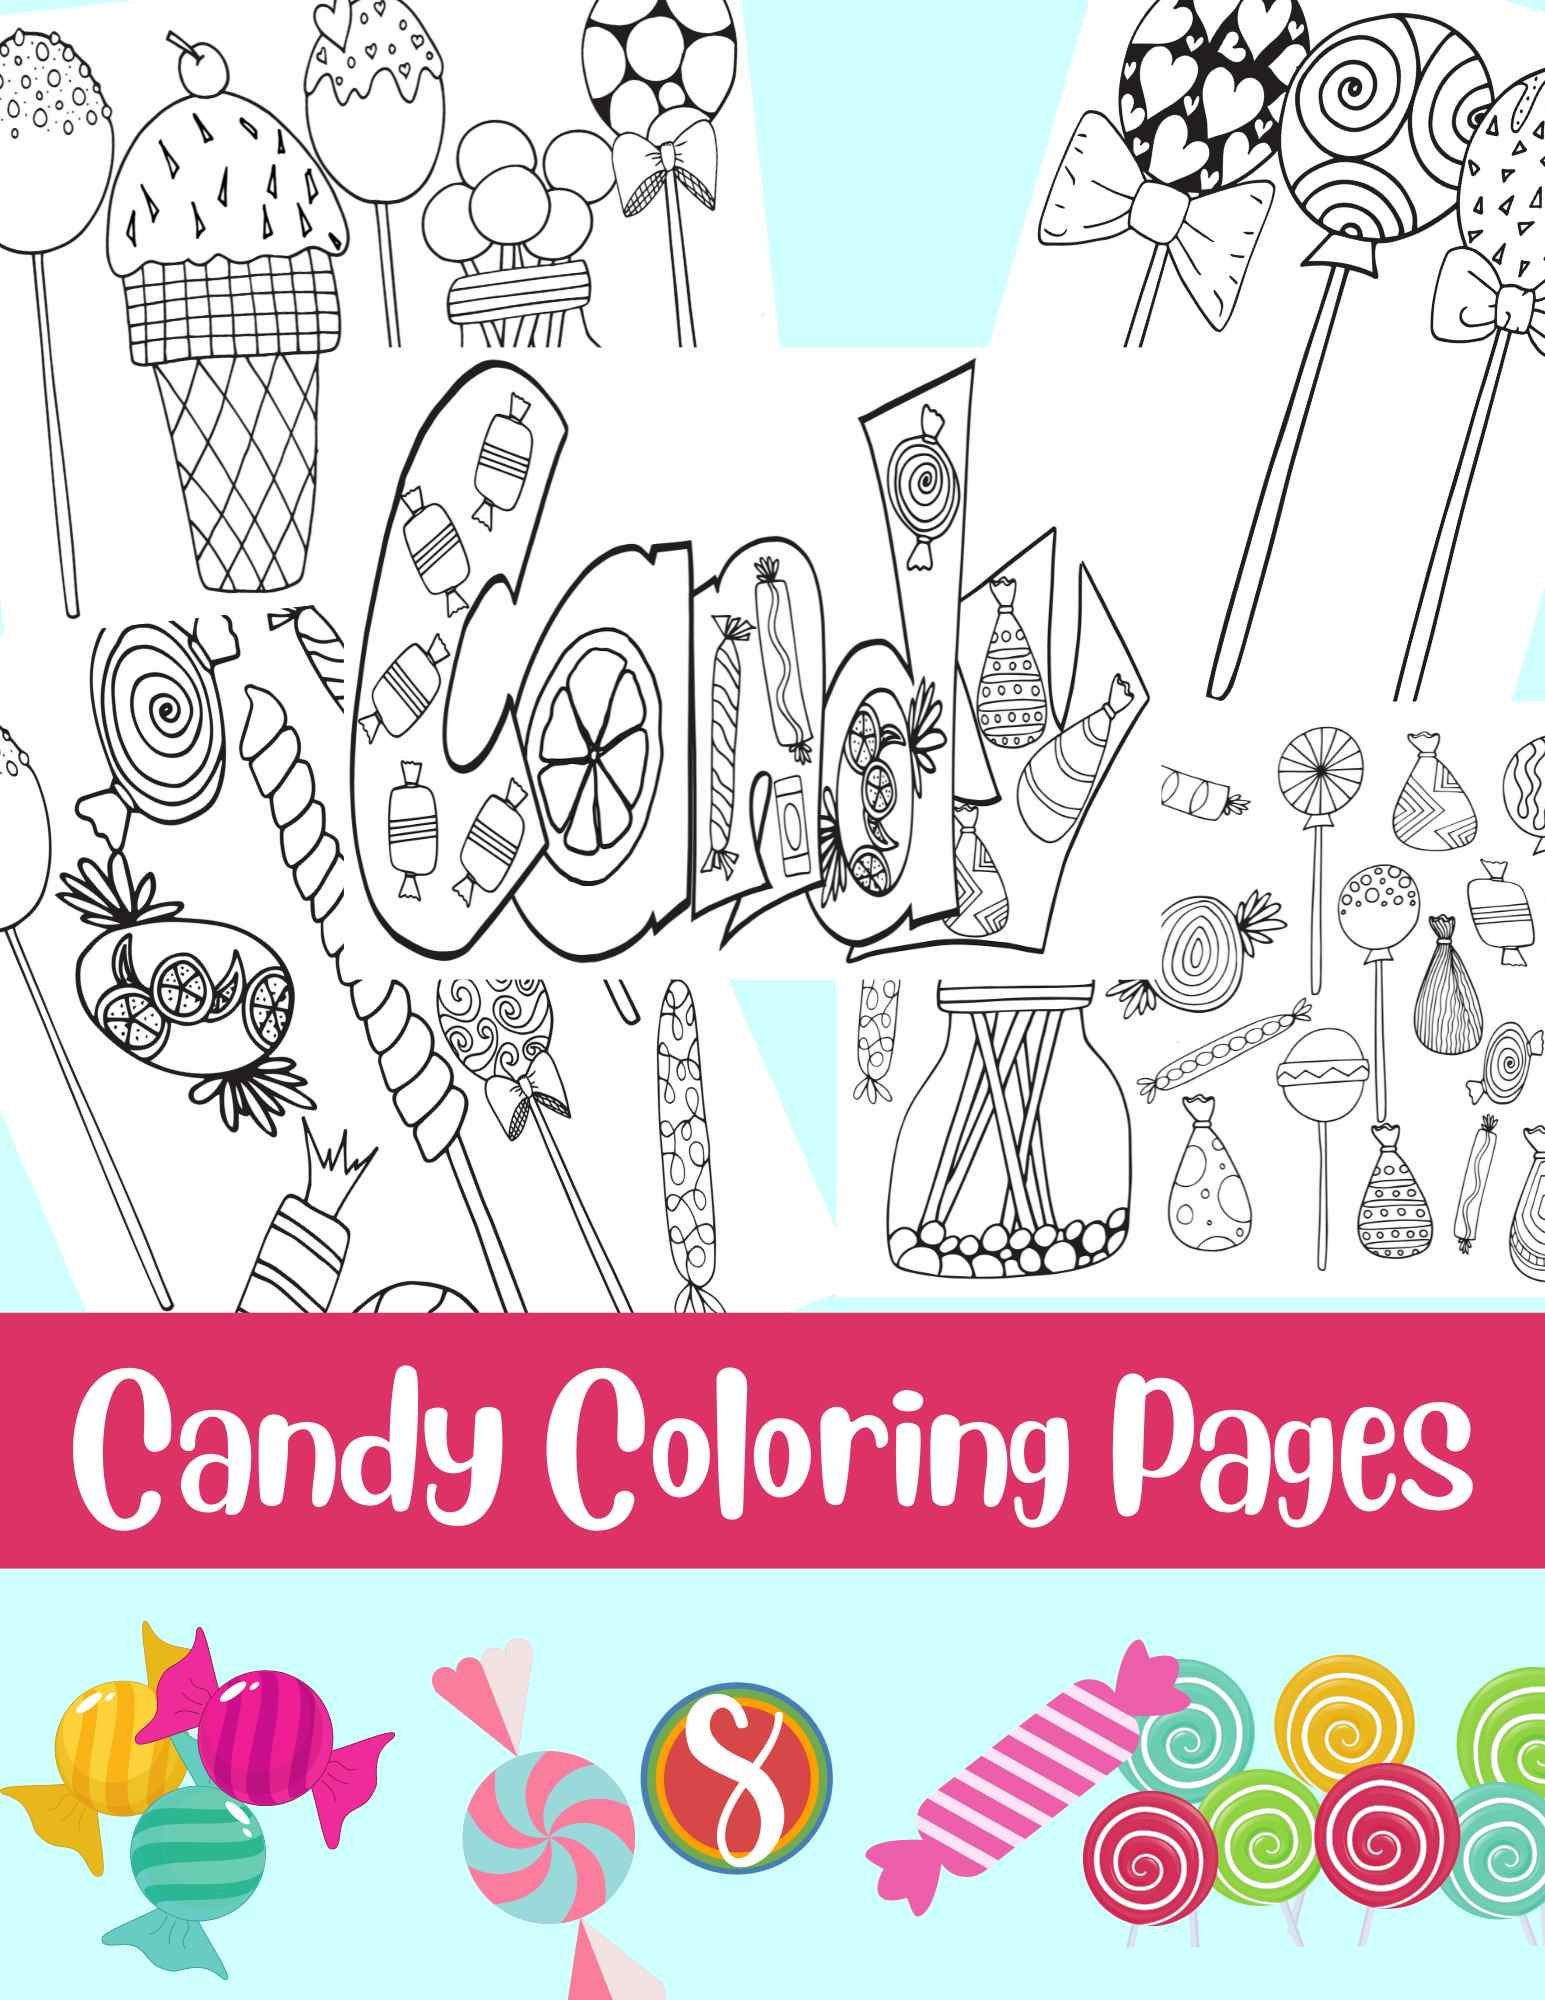 Printable Adult Coloring Pages - Sweet T Makes Three